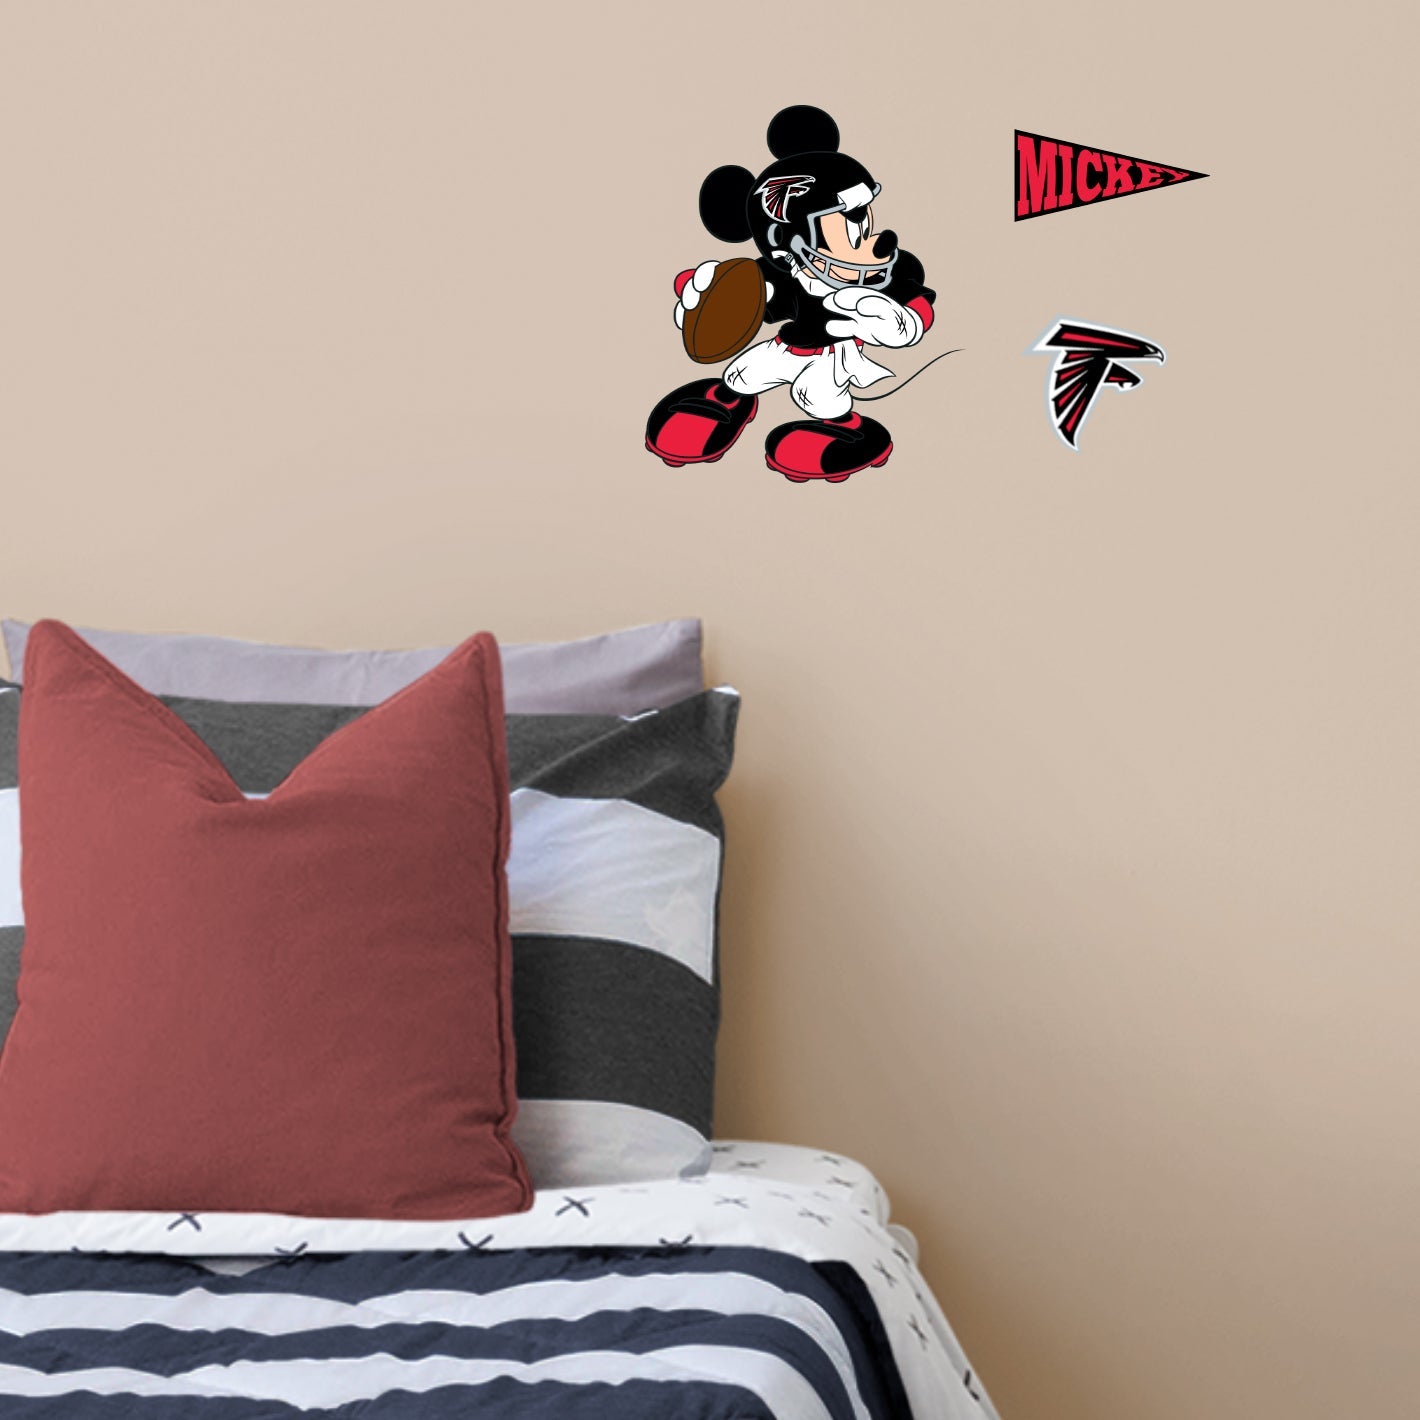 Atlanta Falcons: Mickey Mouse - Officially Licensed NFL Removable Adhesive Decal